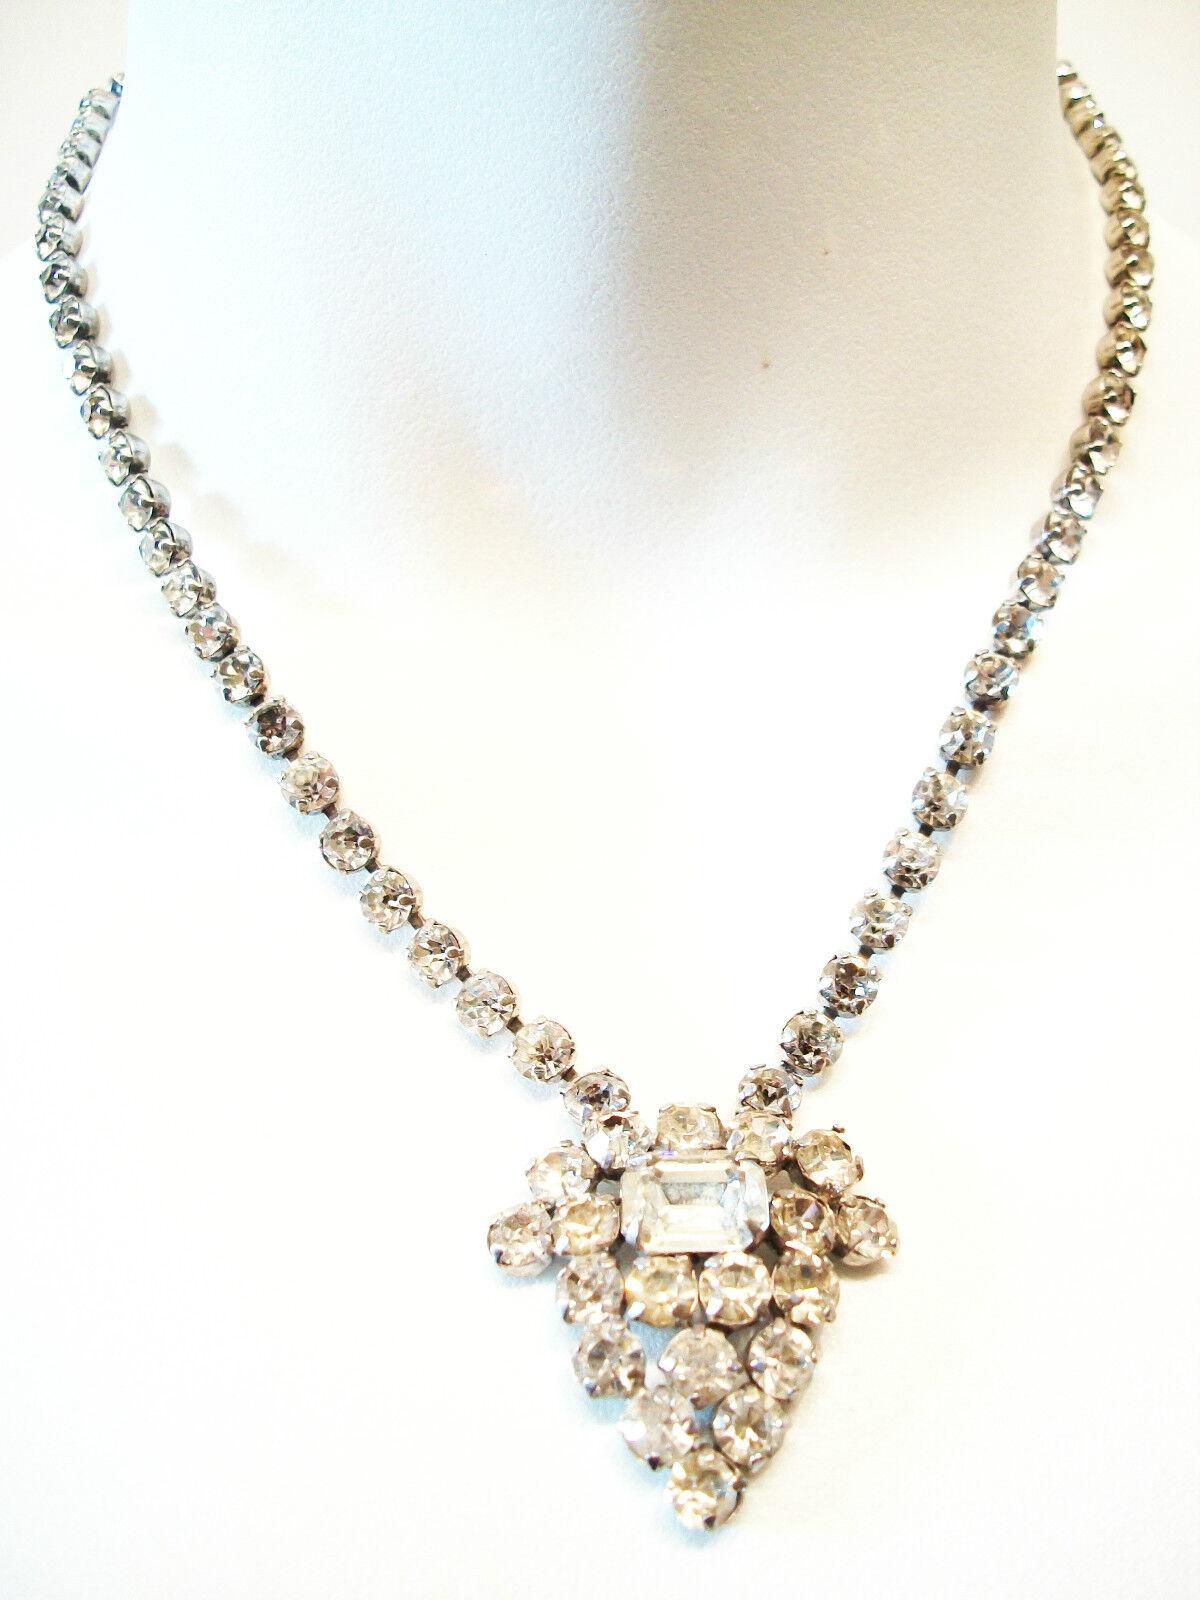 JAY FLEX - Art Deco antique sterling silver and rhinestone necklace - featuring a palmette designed pendant with a central baguette crystal - signed on one of the mounts - also marked STERLING on the same mount - Canada (Montreal - Quebec) - circa